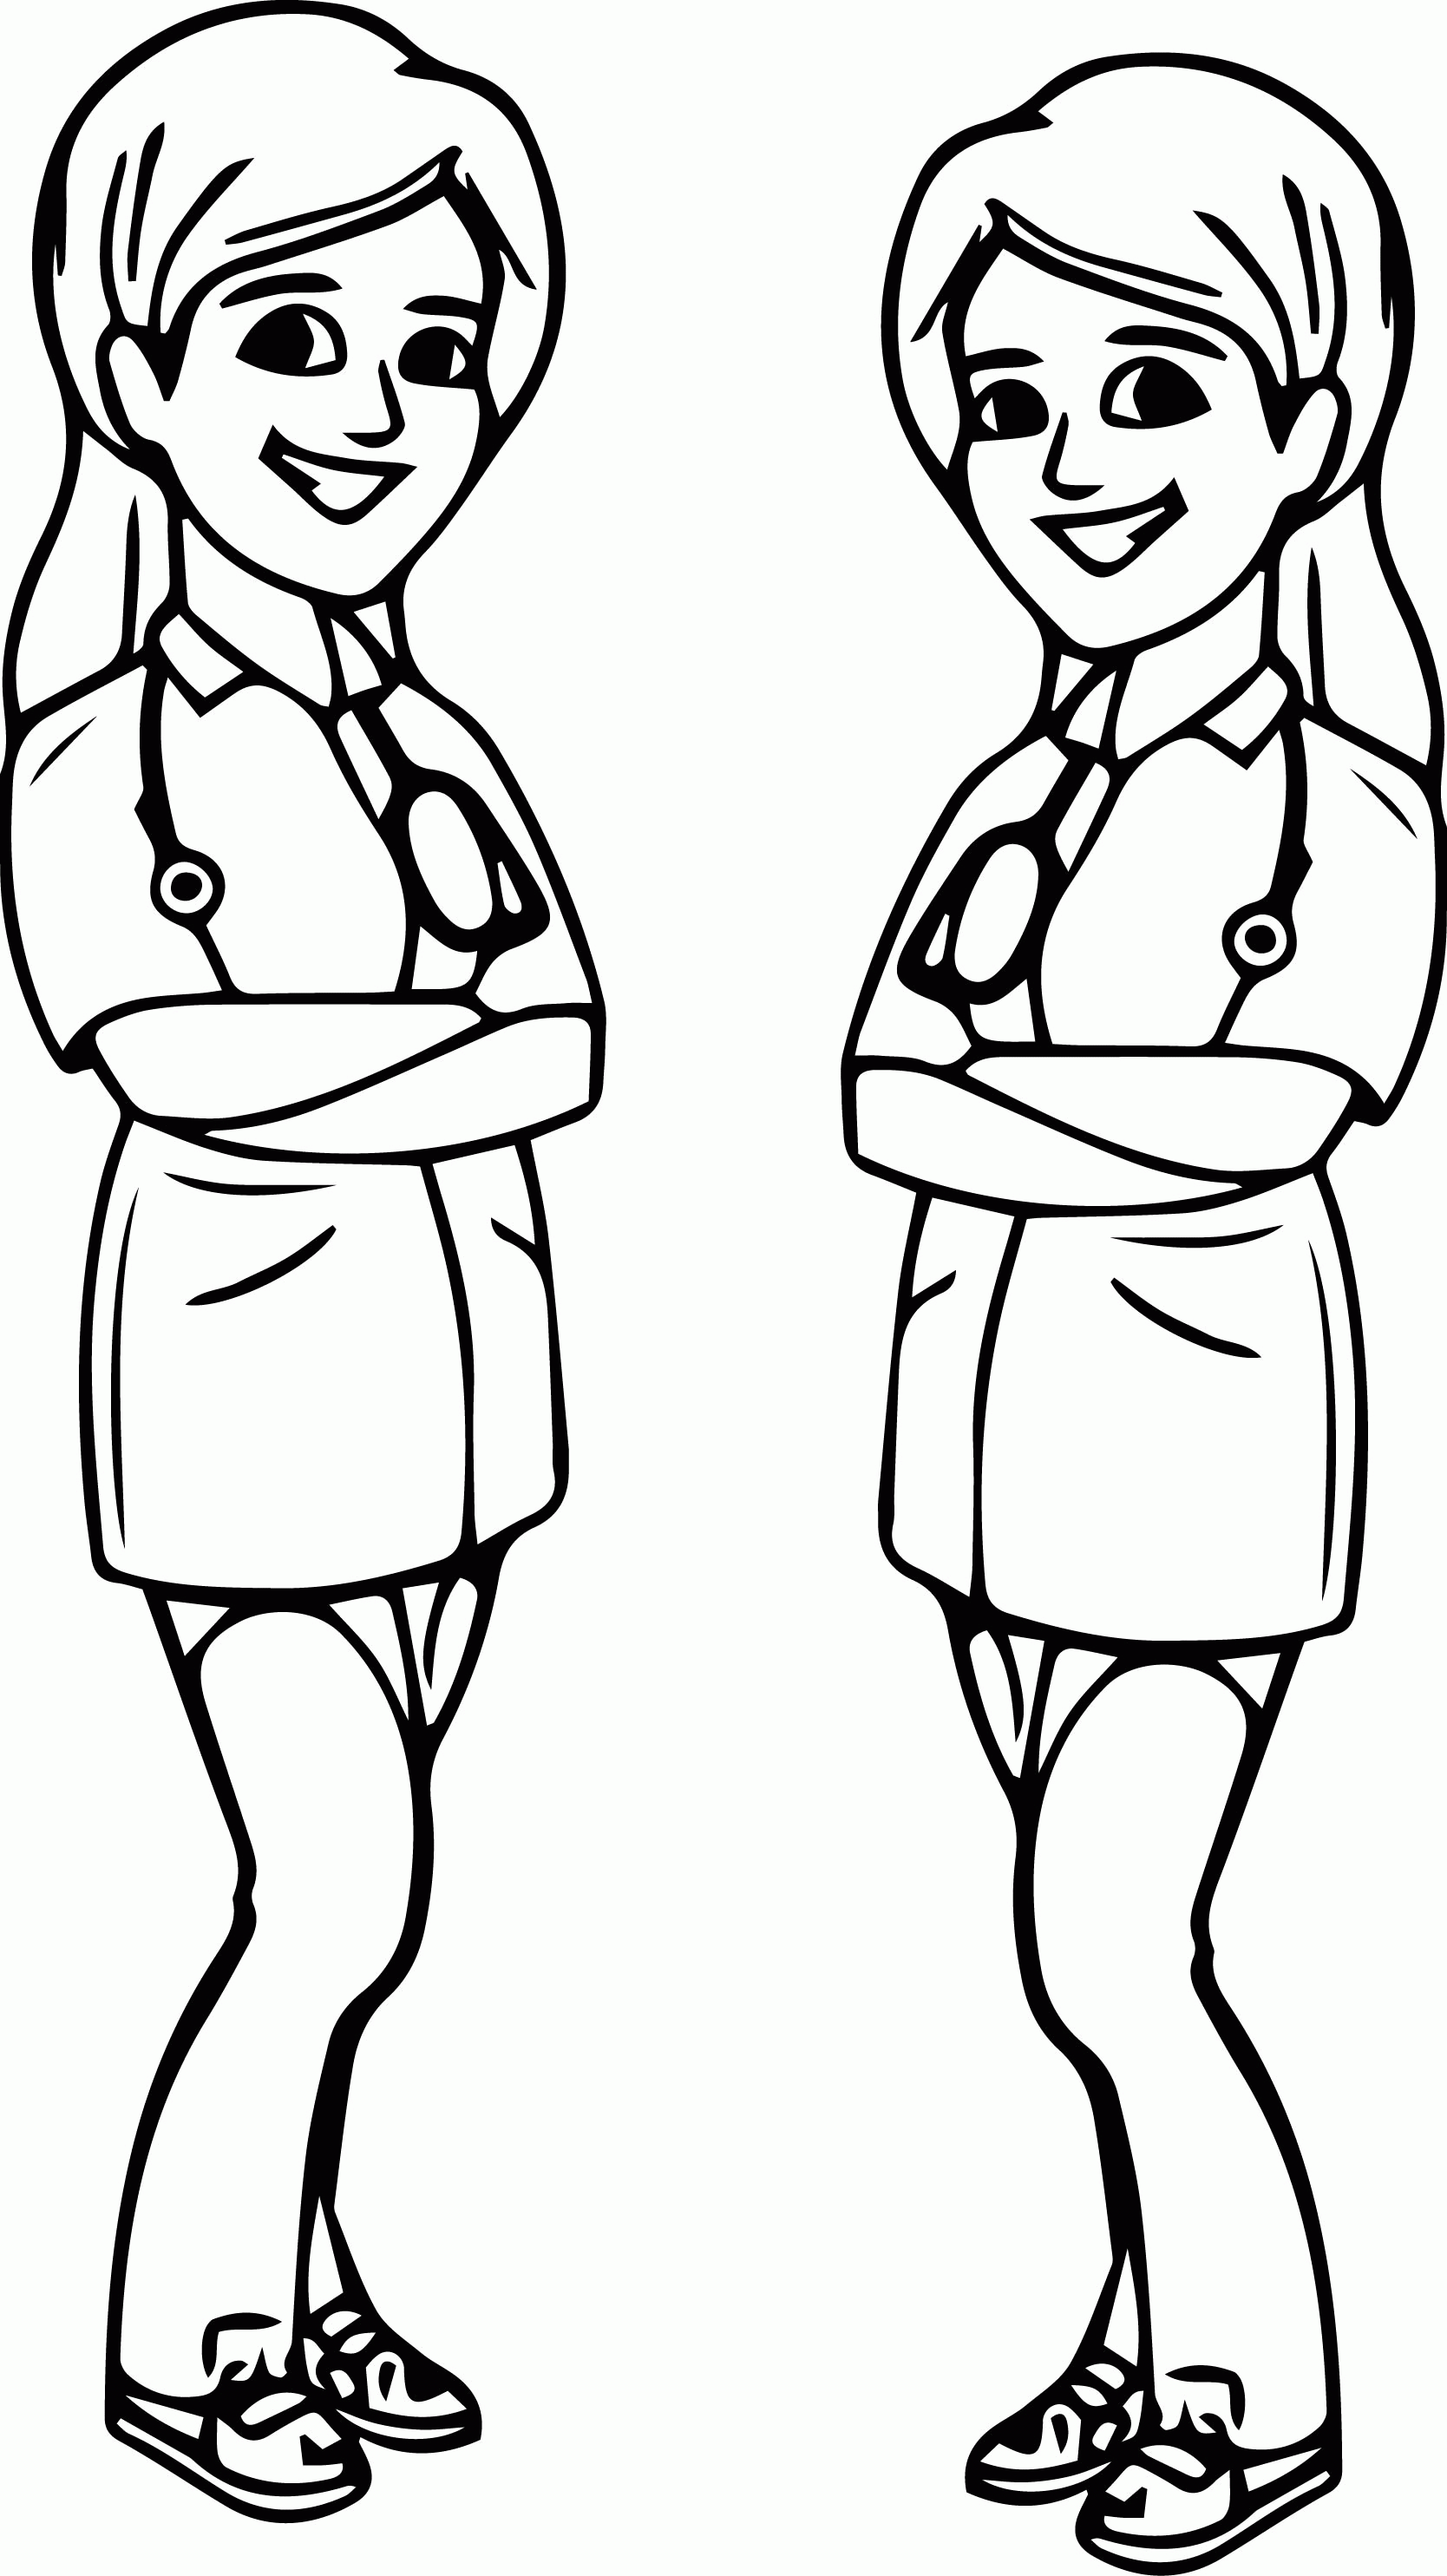 doctor-coloring-pages-free-printable-coloring-pages-for-kids